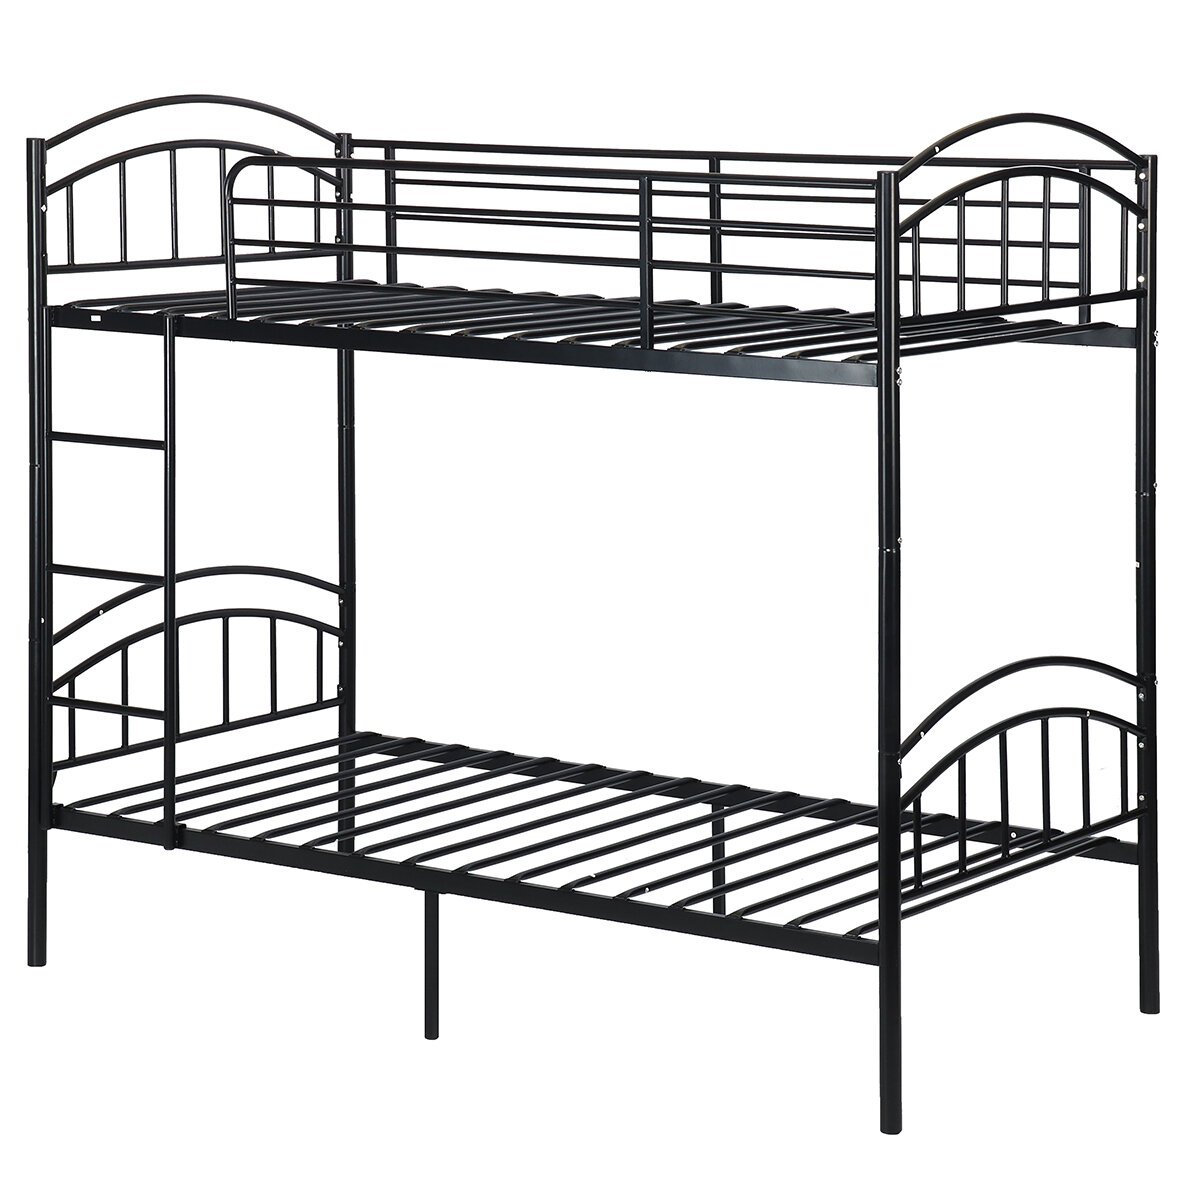 Image of Woodyhome Twin XL Curved Metal Bed Frame Princess Black Platform Bed Frame with Vintage Headboard Footboard Mattress Fou